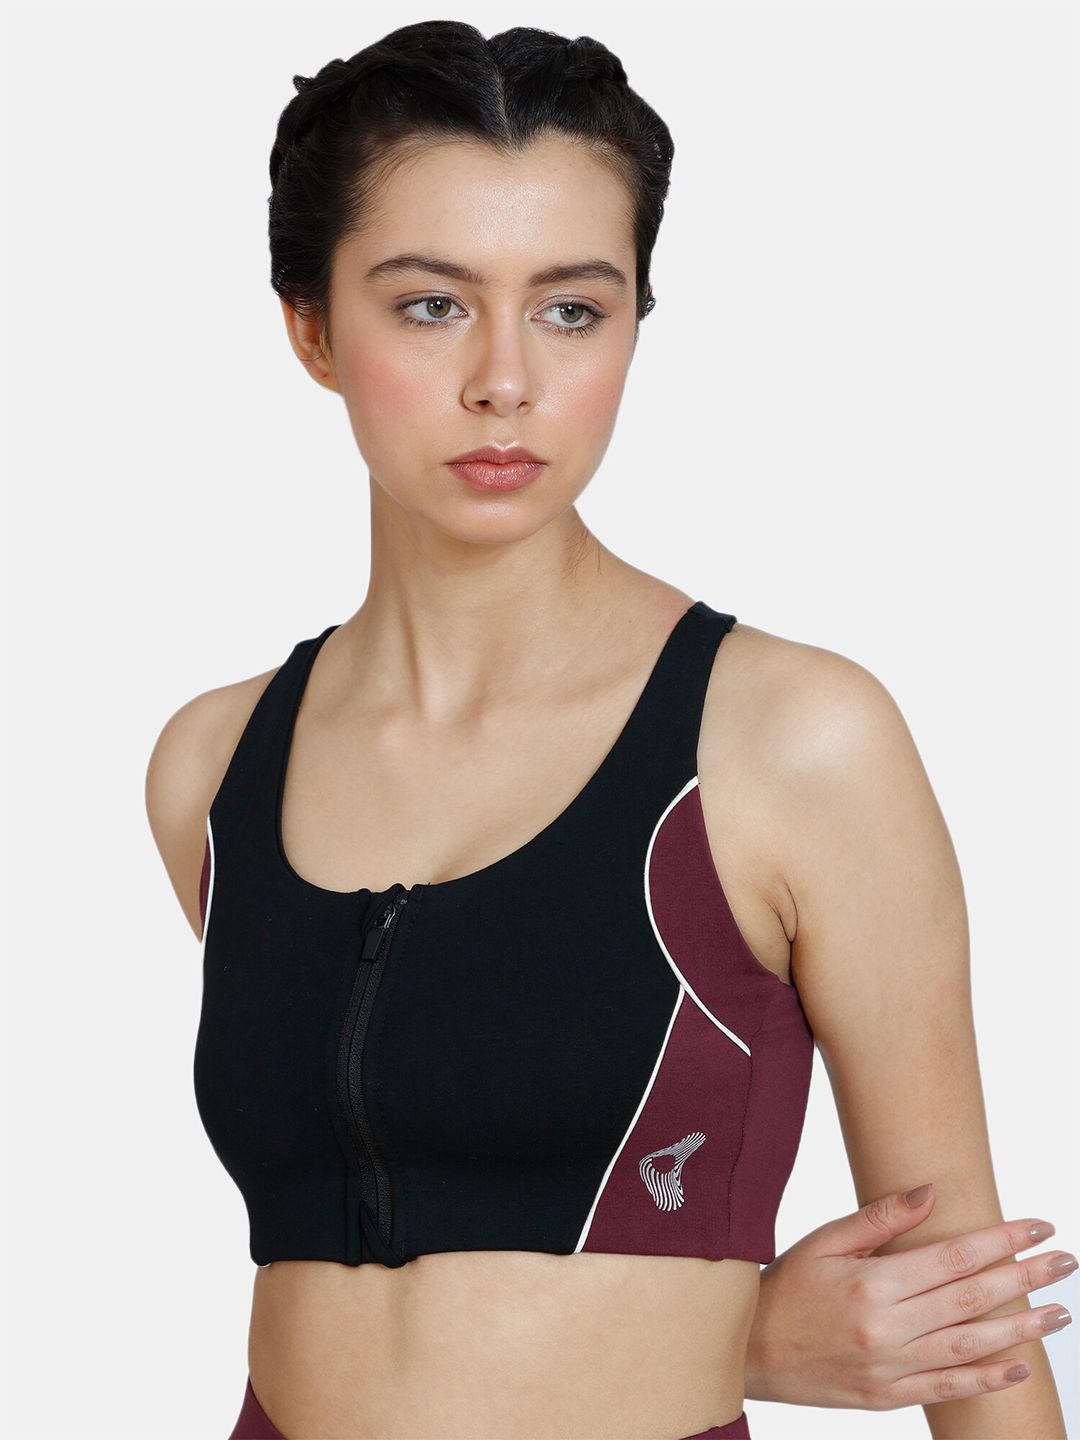 Zelocity by Zivame Black & Maroon Non-Padded Colourblocked Workout Sports Bra ZC40DOFASH0 Price in India